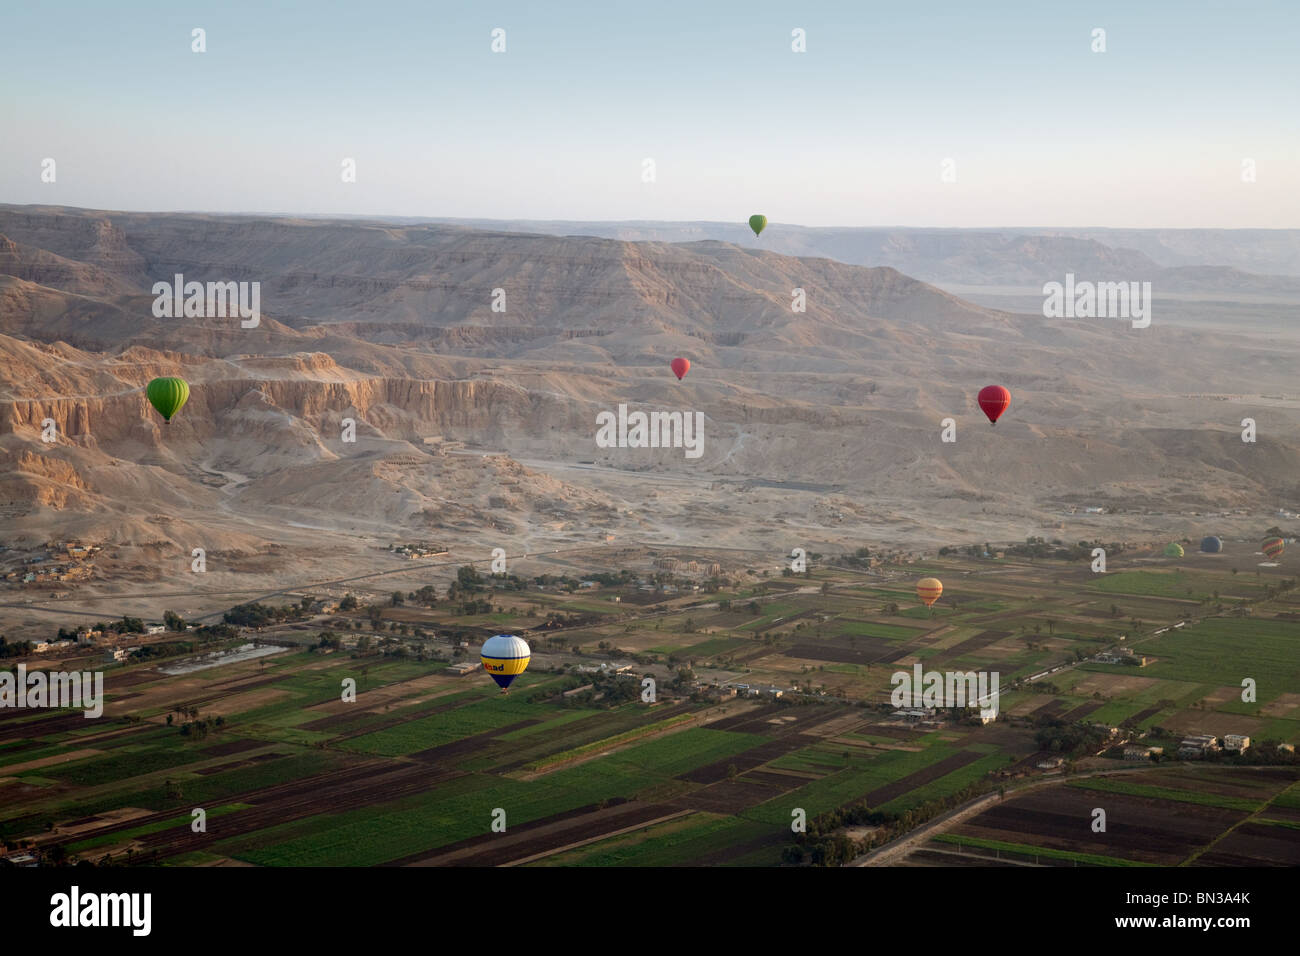 Hot air ballooning from Luxor over the Valley of the Kings, Luxor, Egypt Stock Photo